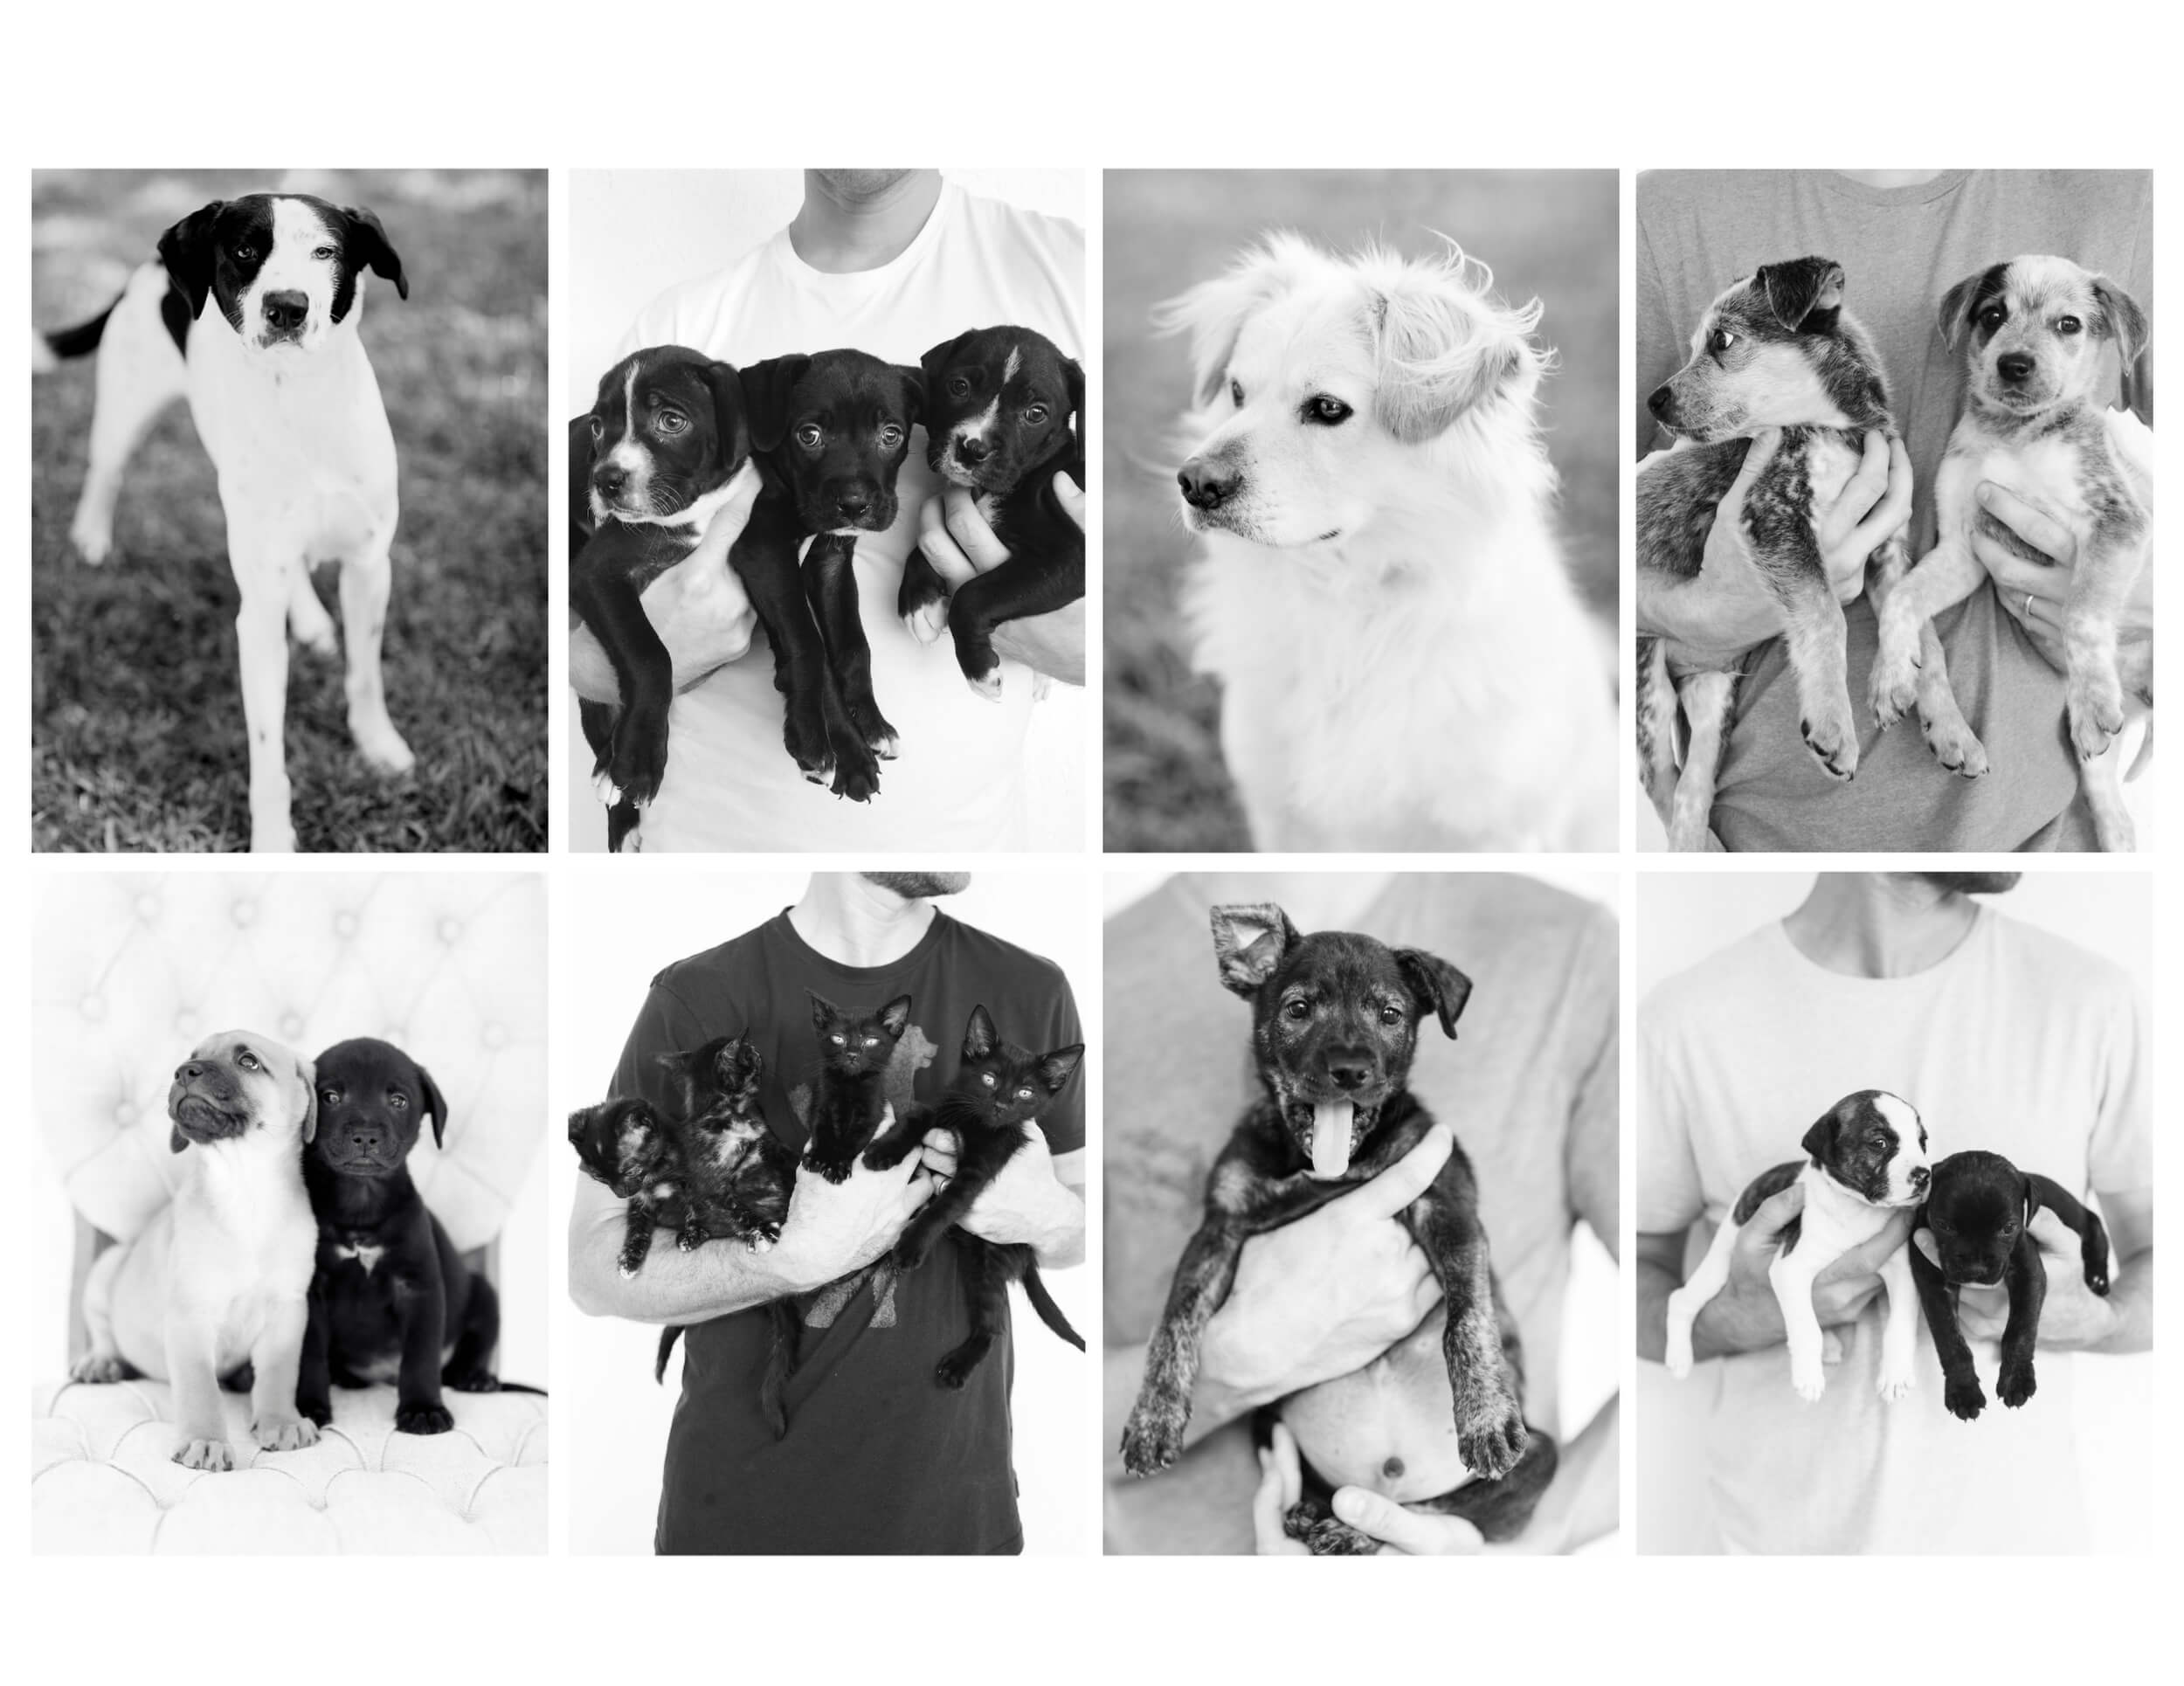 foster dogs and puppies in black and white portraits by KT Merry